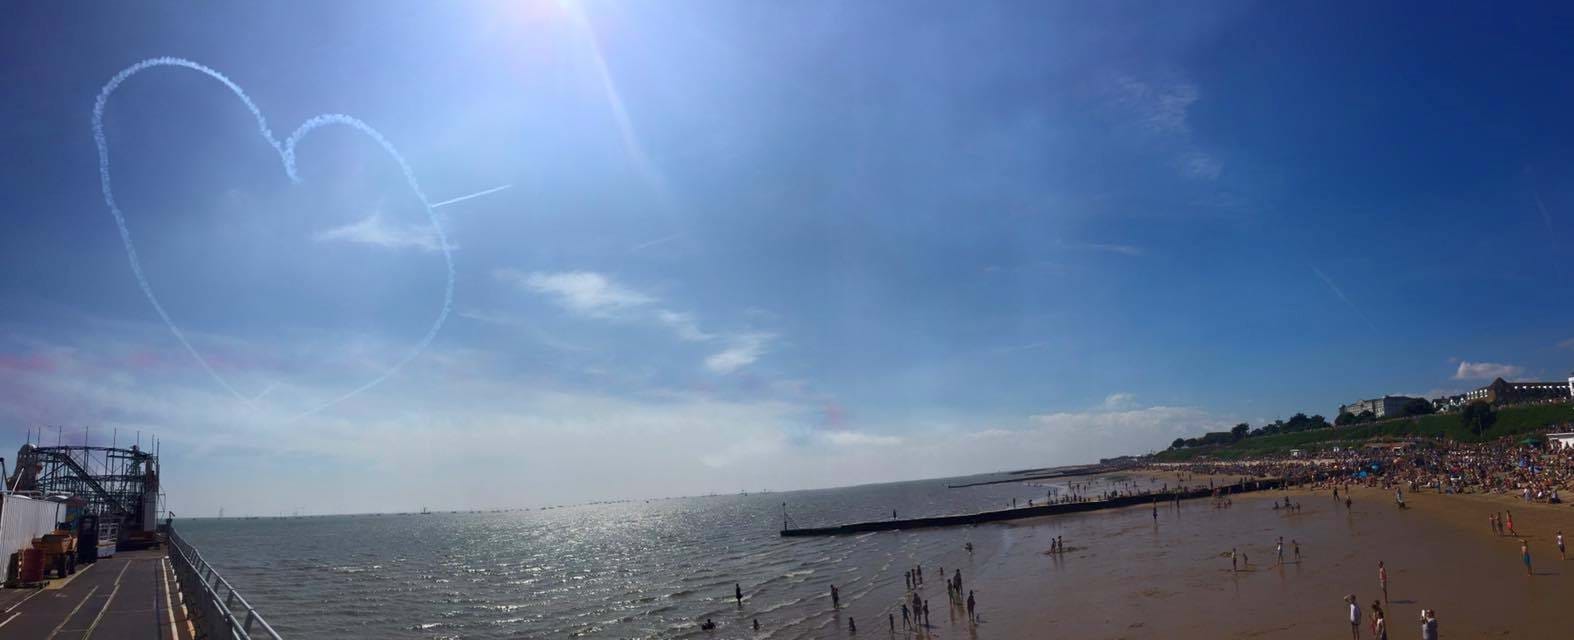 Clacton Beach : View from the Pier